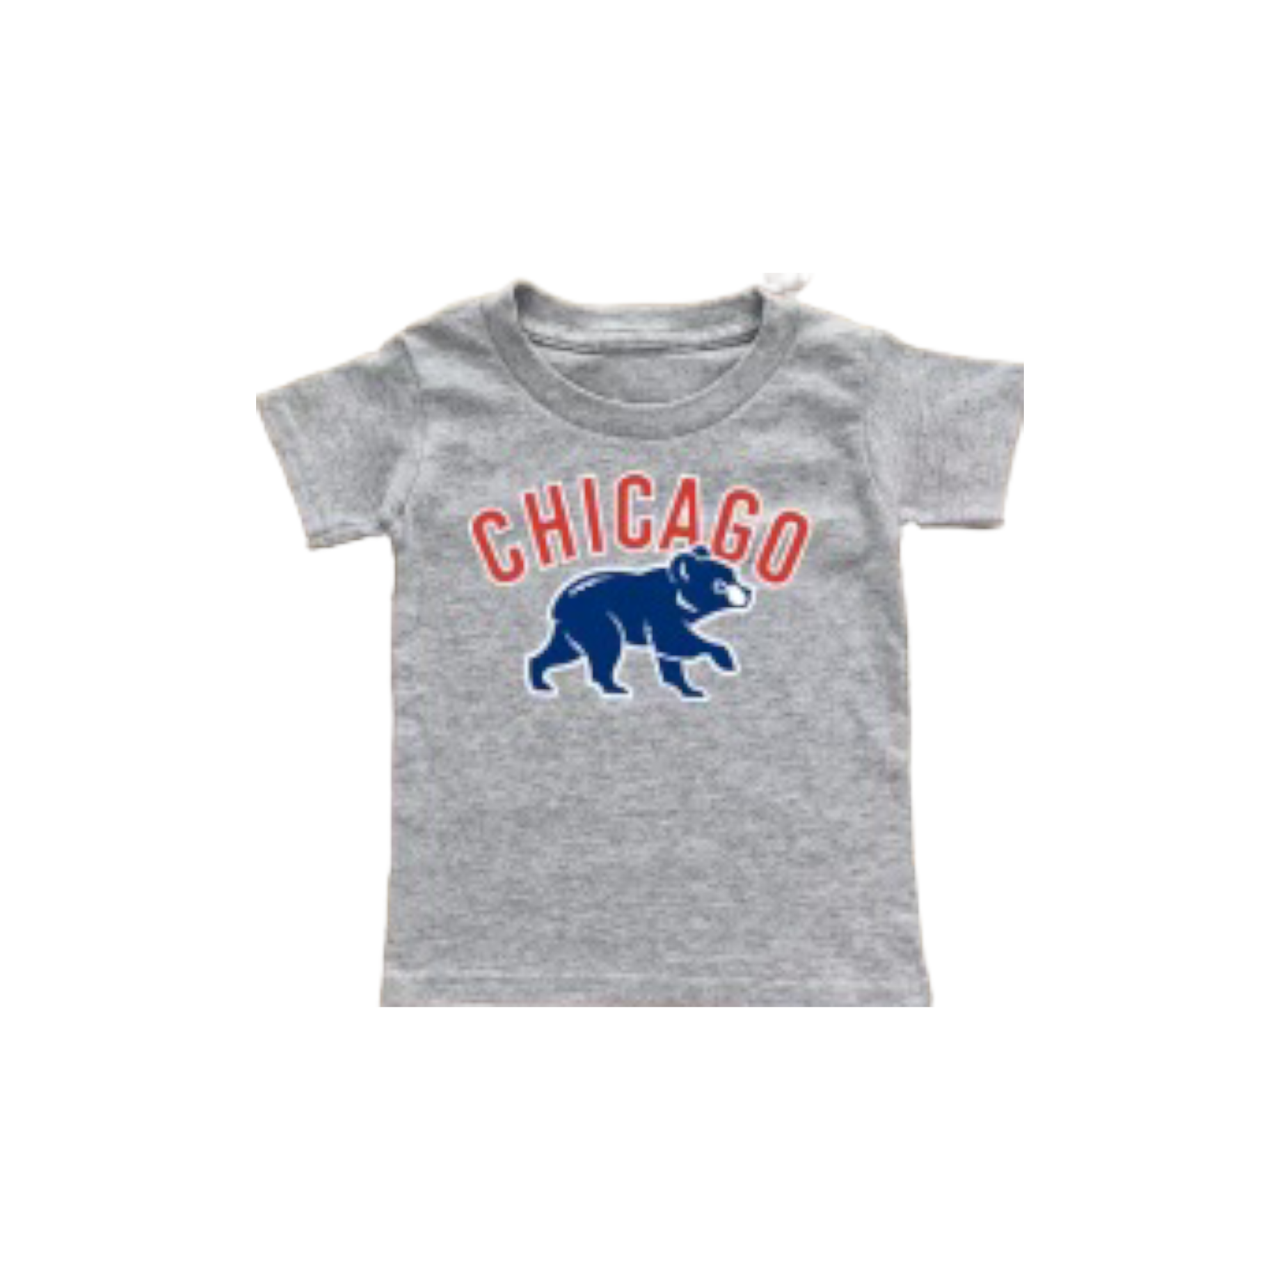 Chicago Cubs Tee - Twinkle Twinkle Little One